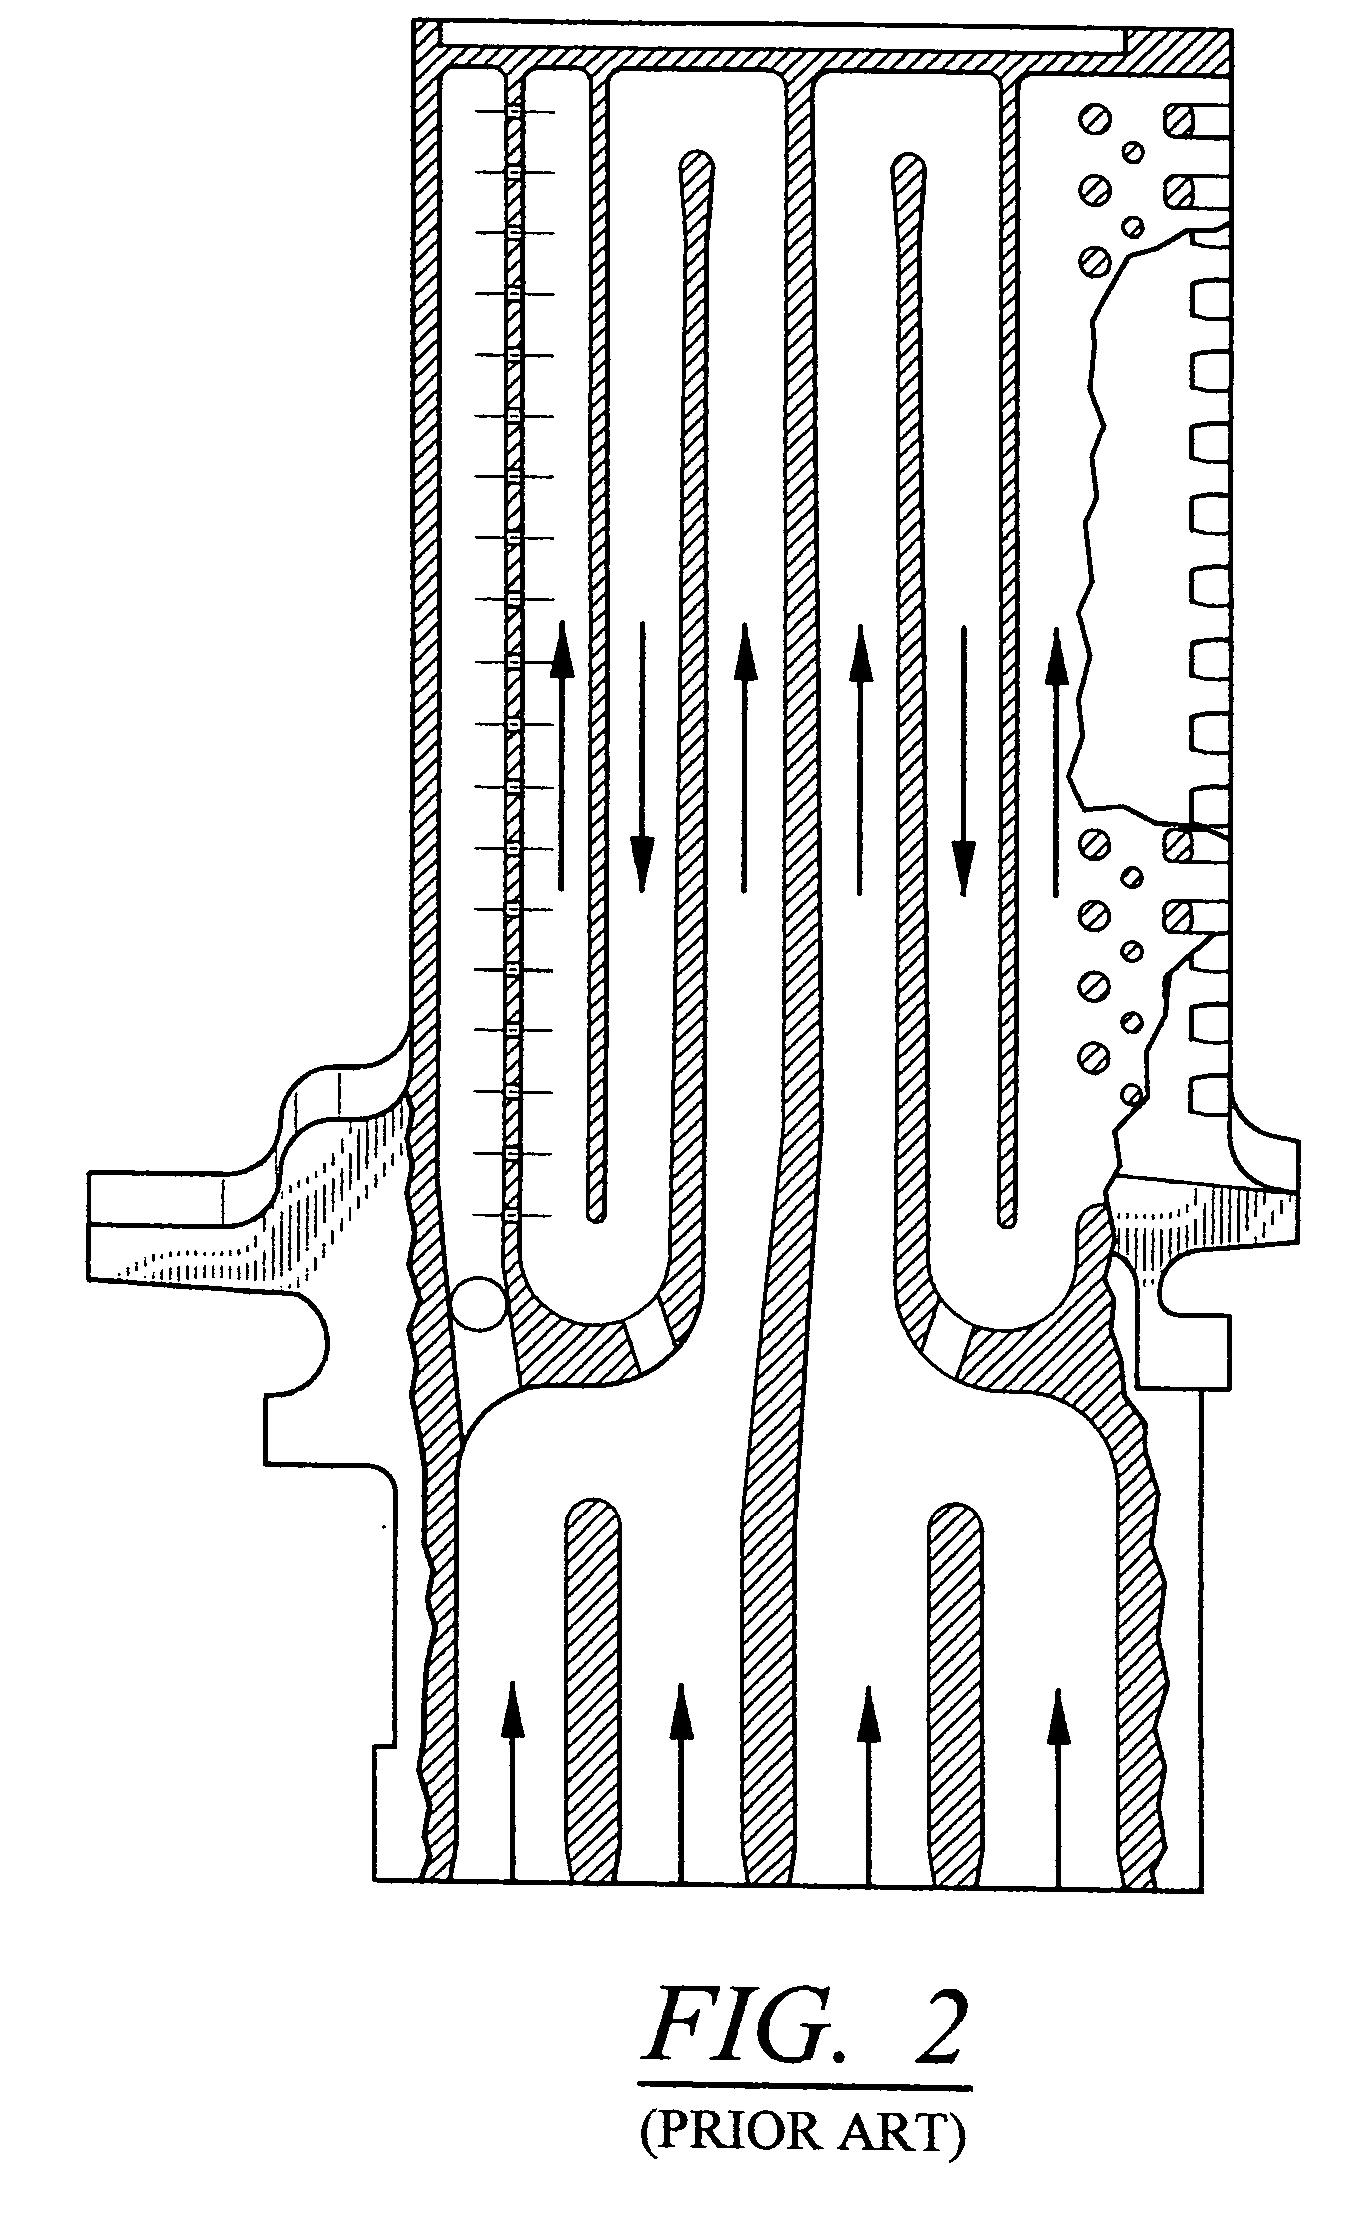 Internal cooling system for a turbine blade